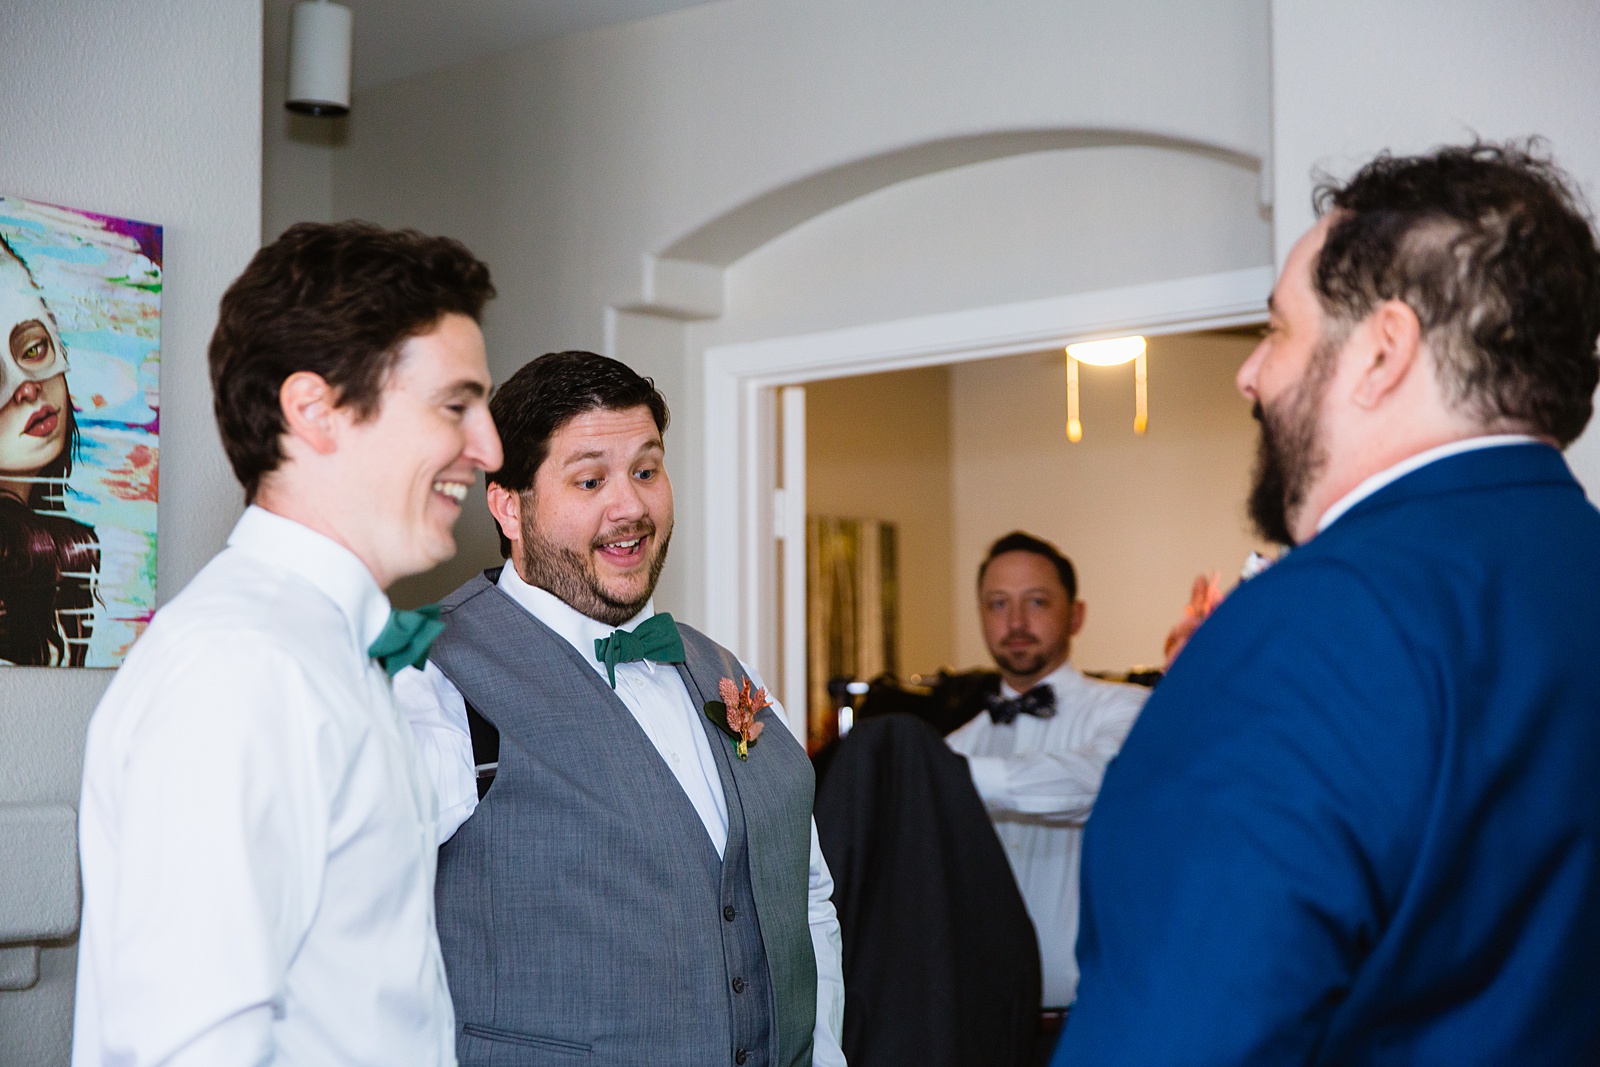 Groomsmen laughing together while getting ready by PMA Photography.